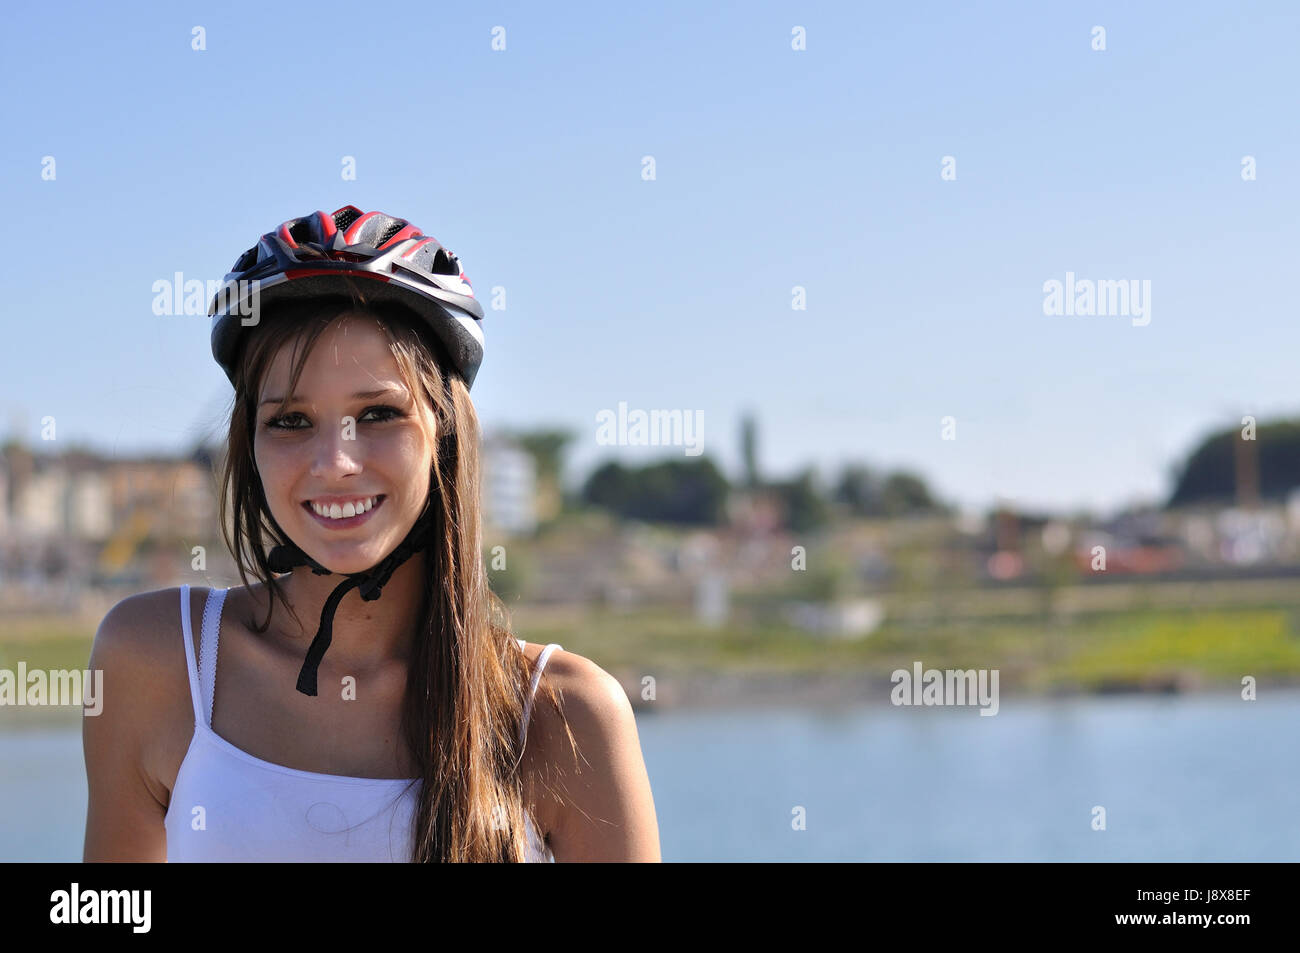 summer sun sport and woman with good humor Stock Photo